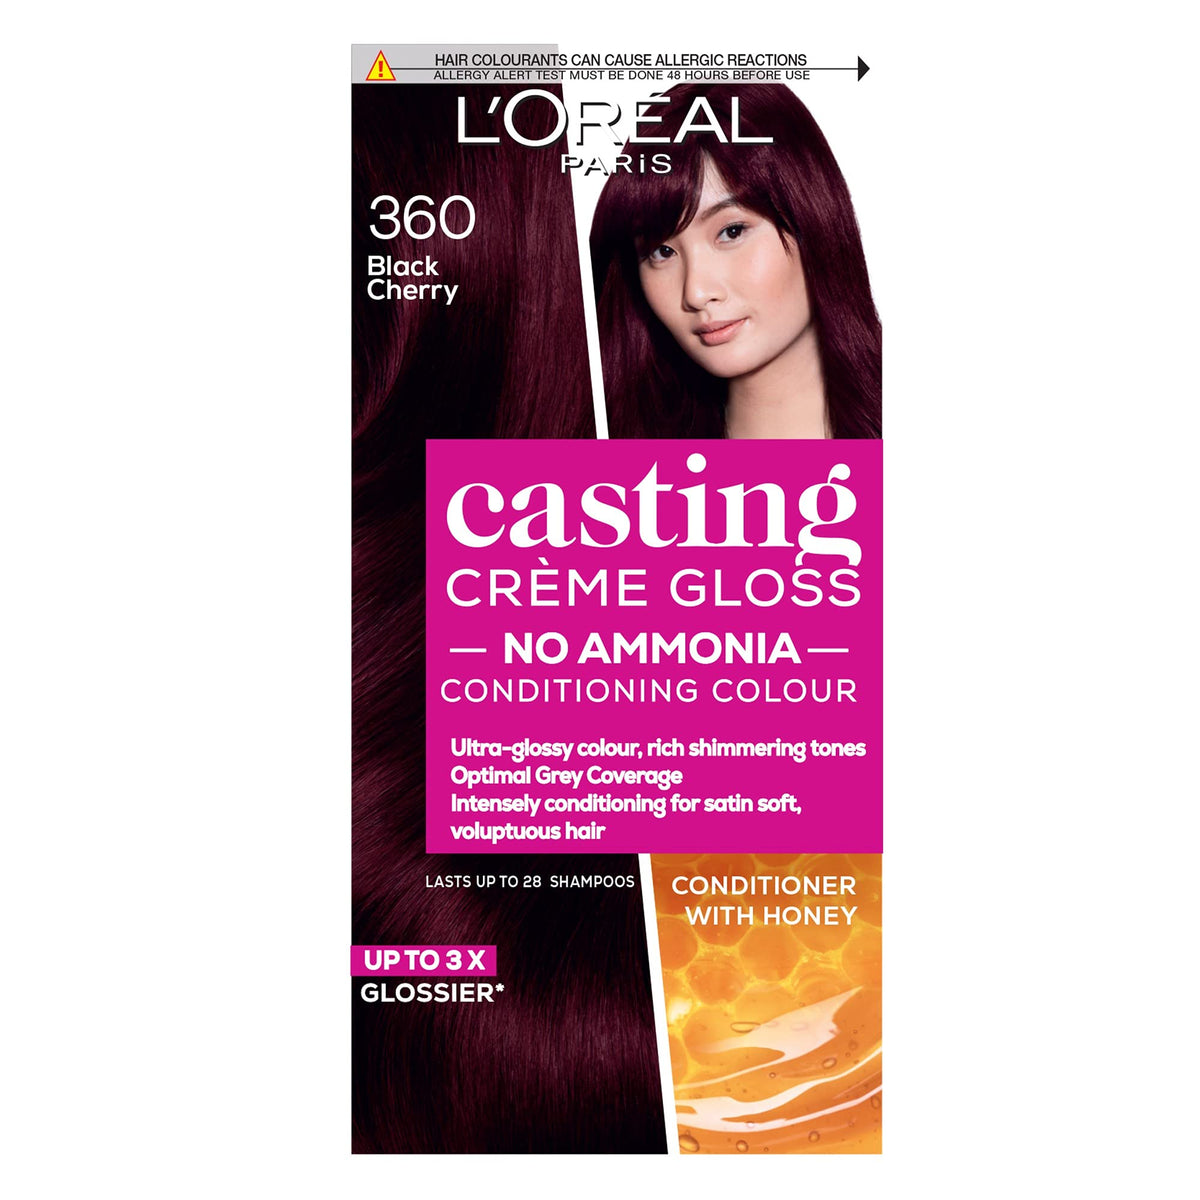 L'Oreal Paris Casting Creme Gloss semi-permanent hair dye, blends away grey hair leaving a radiant hair colour, black hair dye 360 Black Cherry, 360 Black Cherry, 1 Count (Pack of 1)